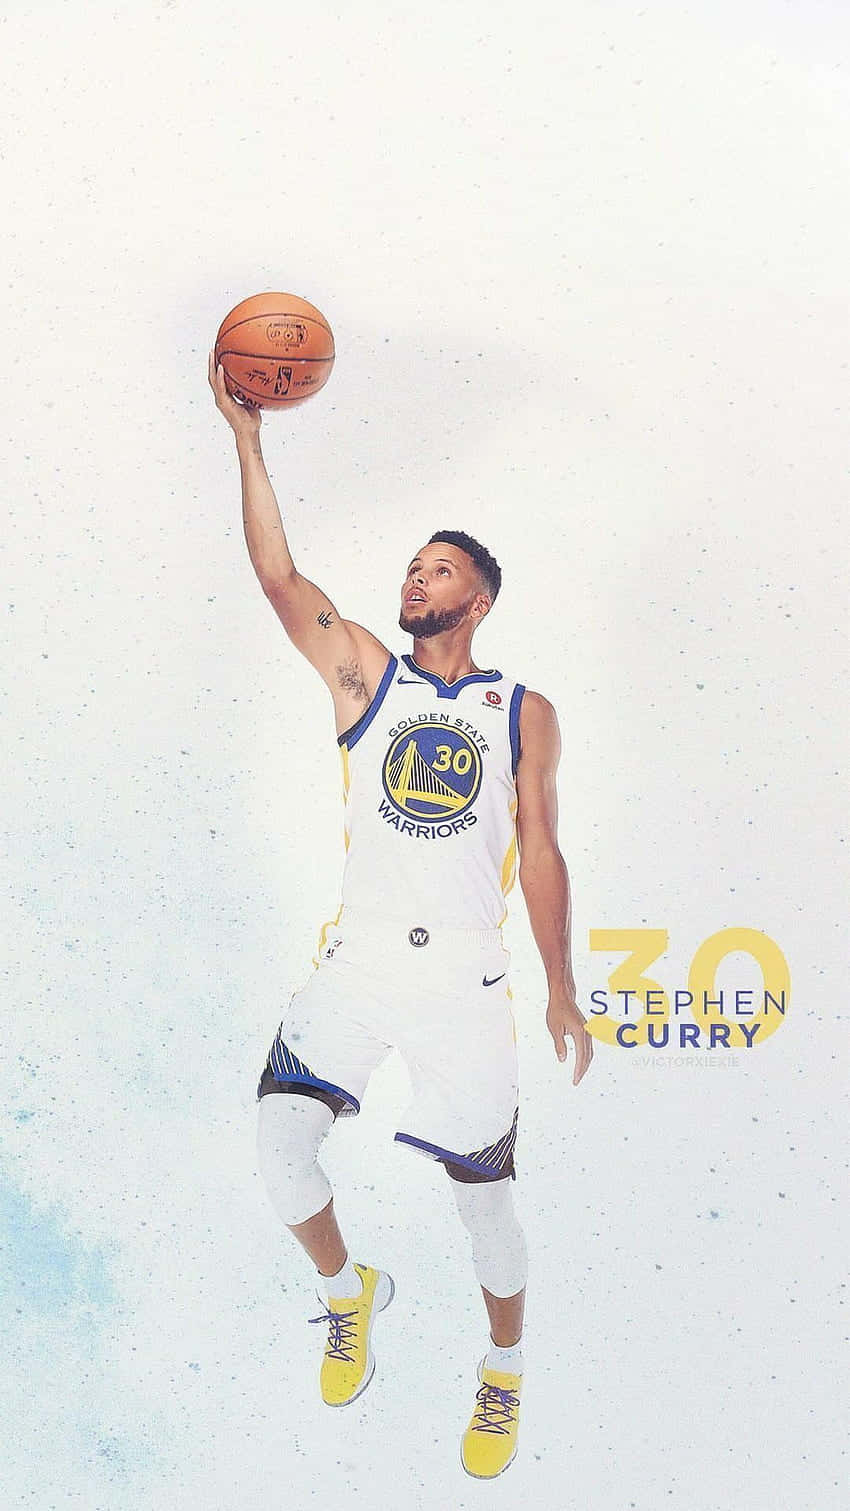 Stephen Curry - Shooting Records Like It's Nothing Wallpaper